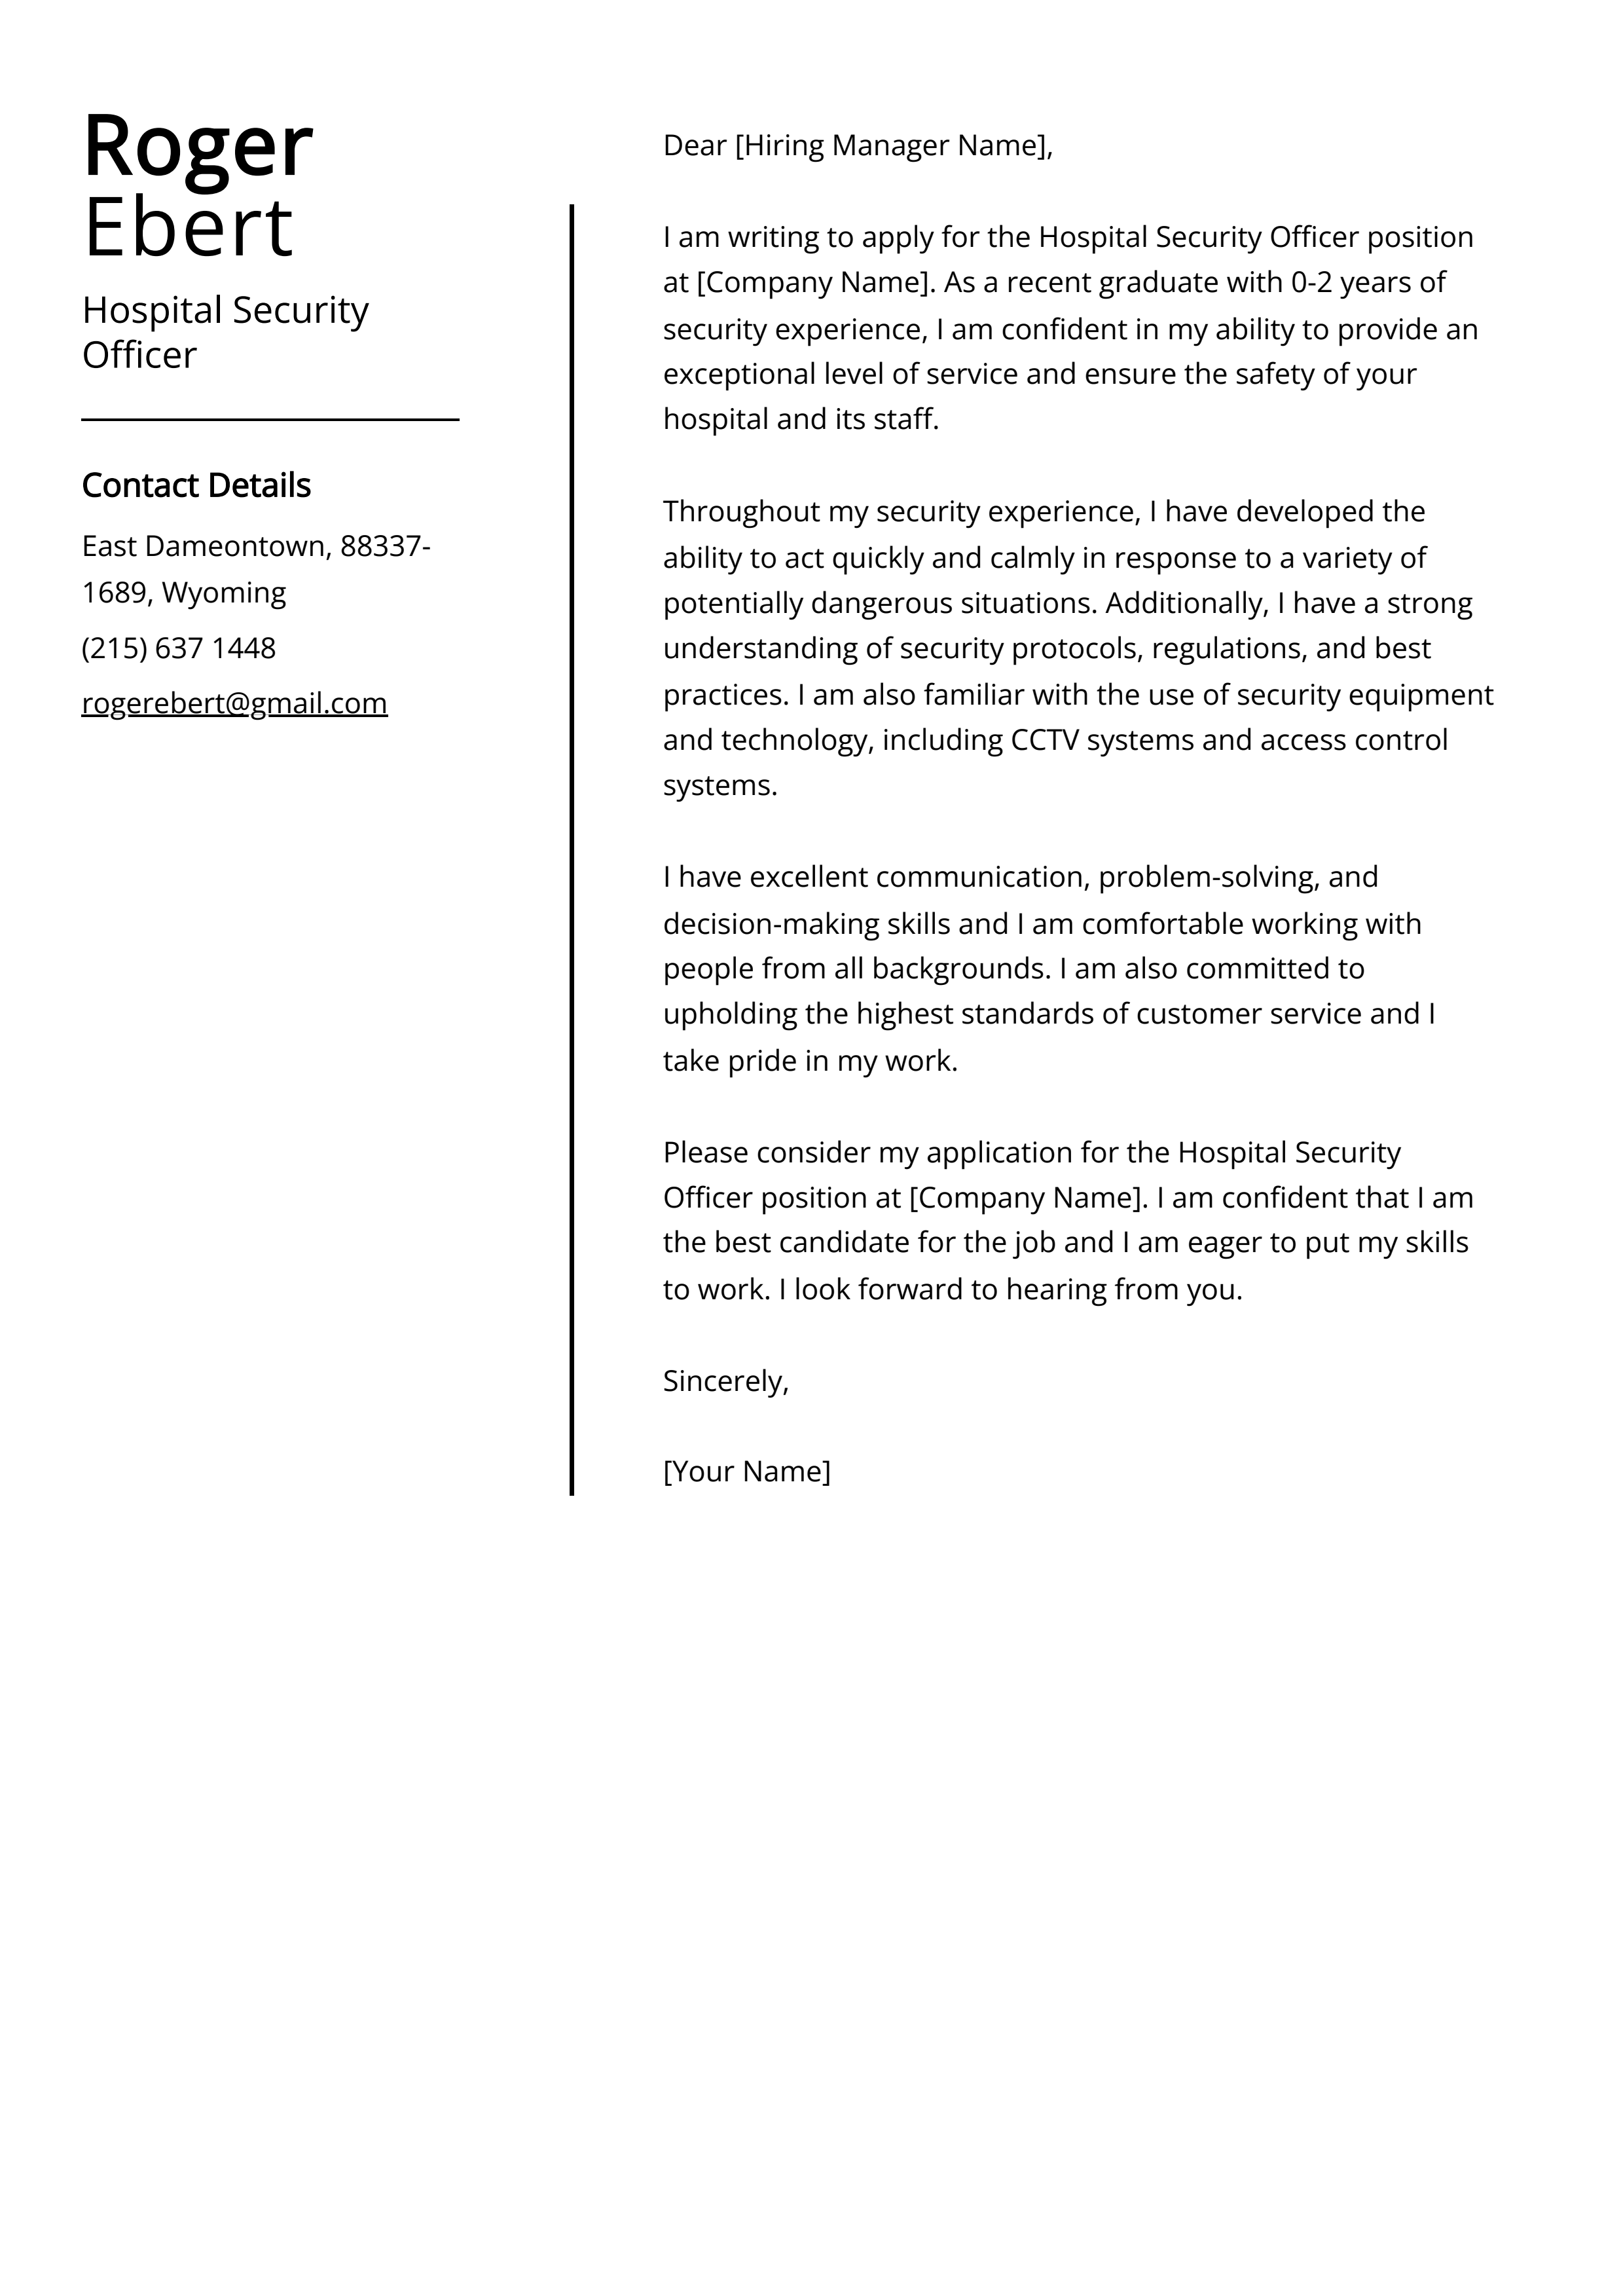 Hospital Security Officer Cover Letter Example